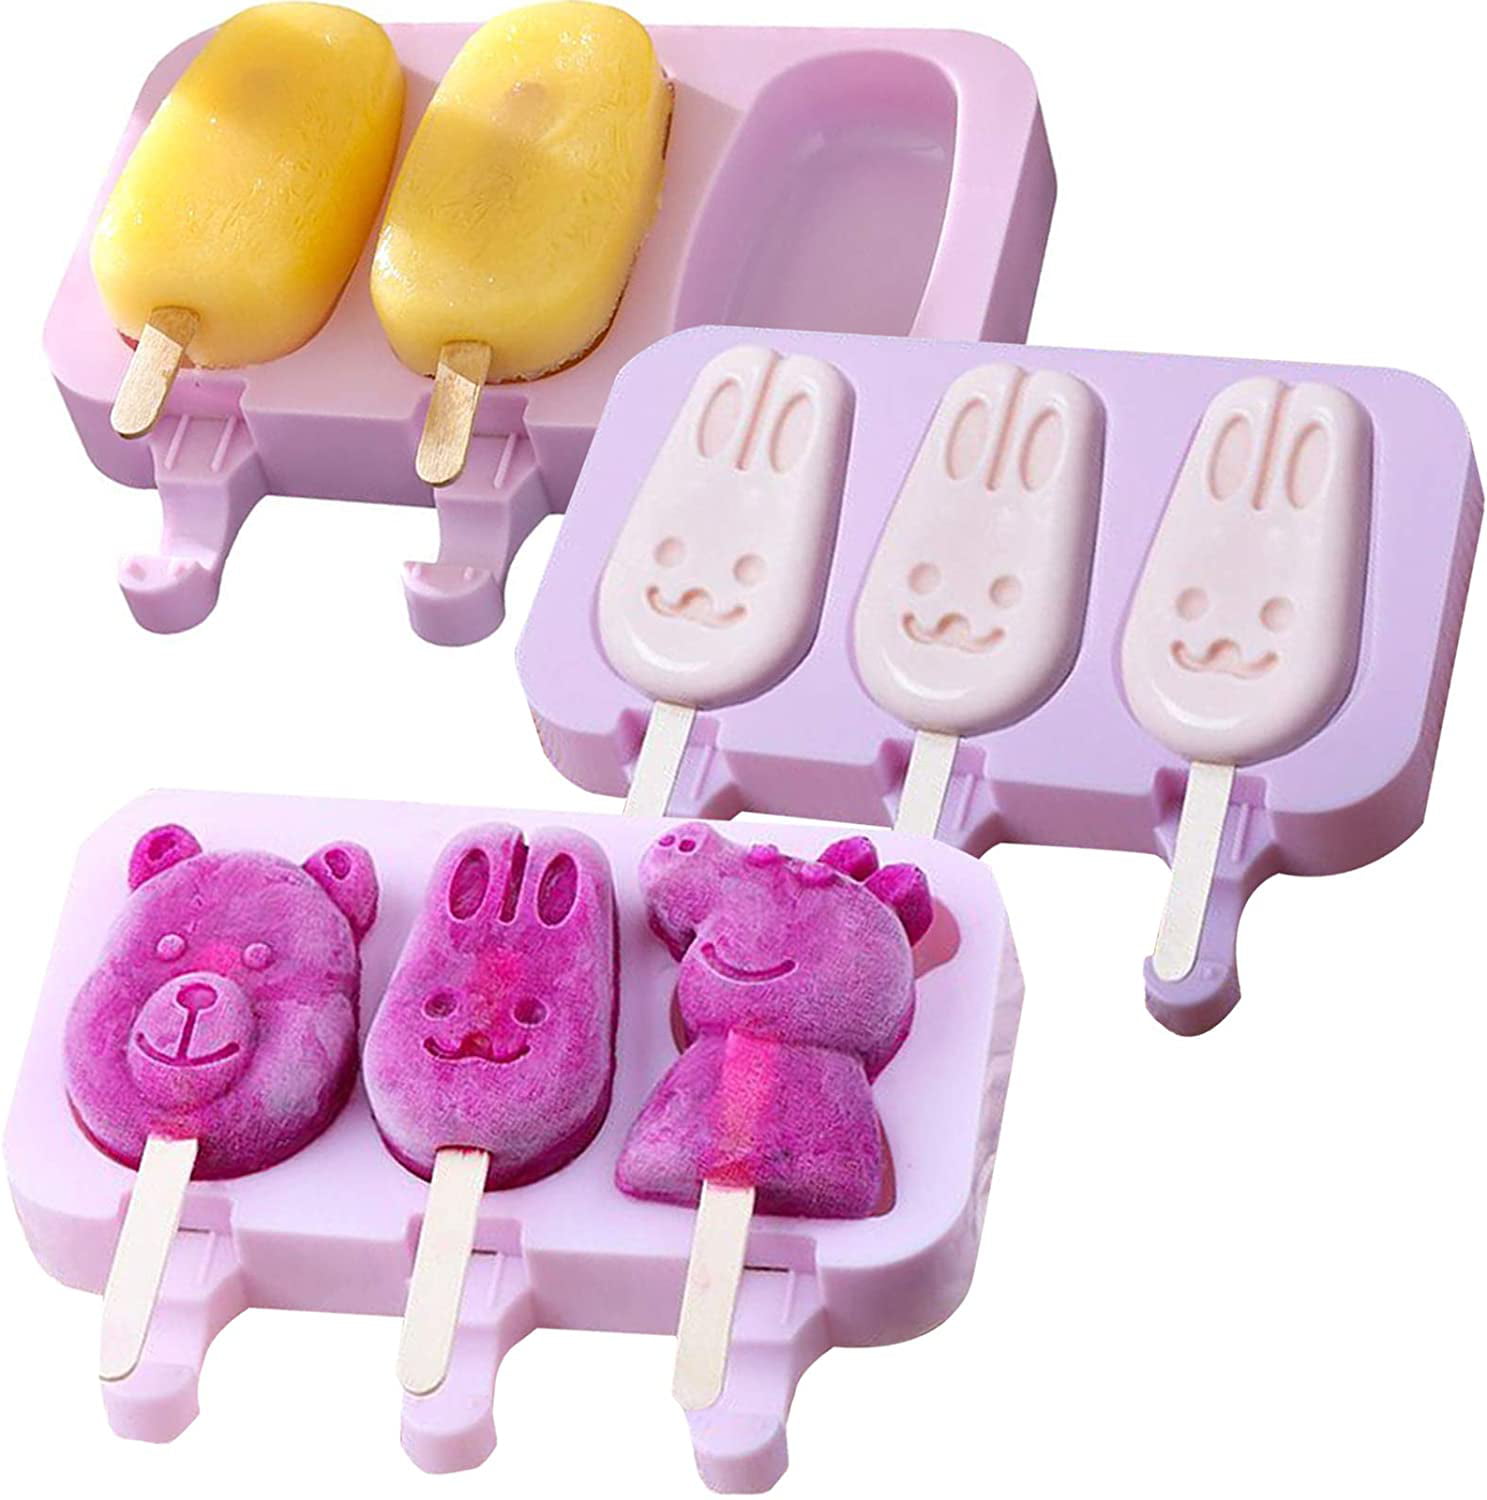 DIY Silicone Frozen Ice Cream Mold Juice Popsicle Maker Ice Lolly Mould 